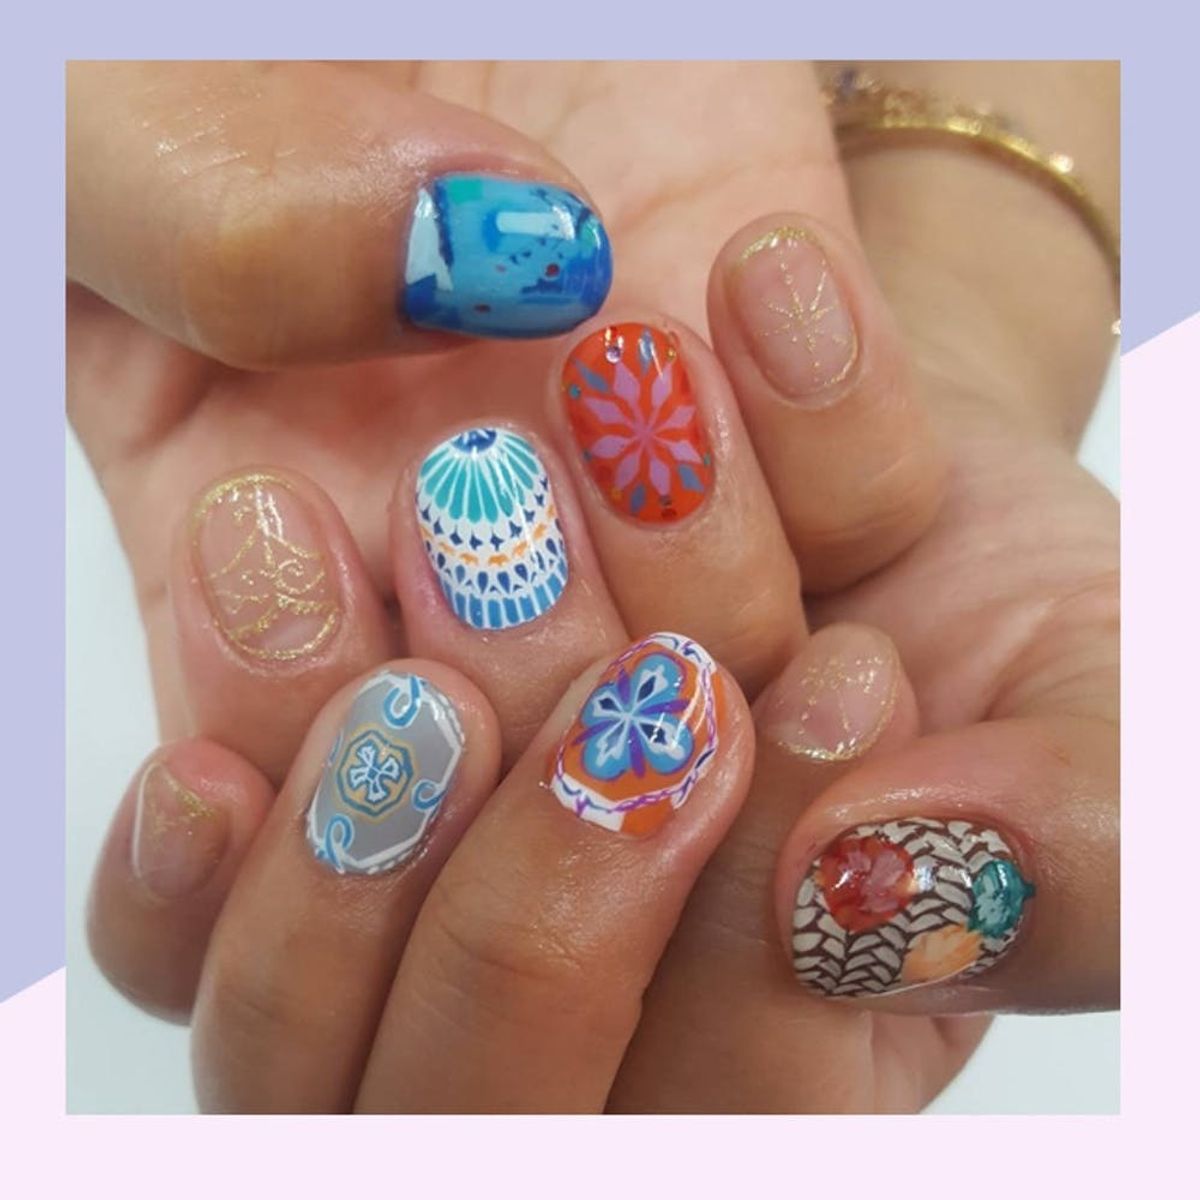 Moroccan-Inspired Nails Are Taking Over Instagram Right Now